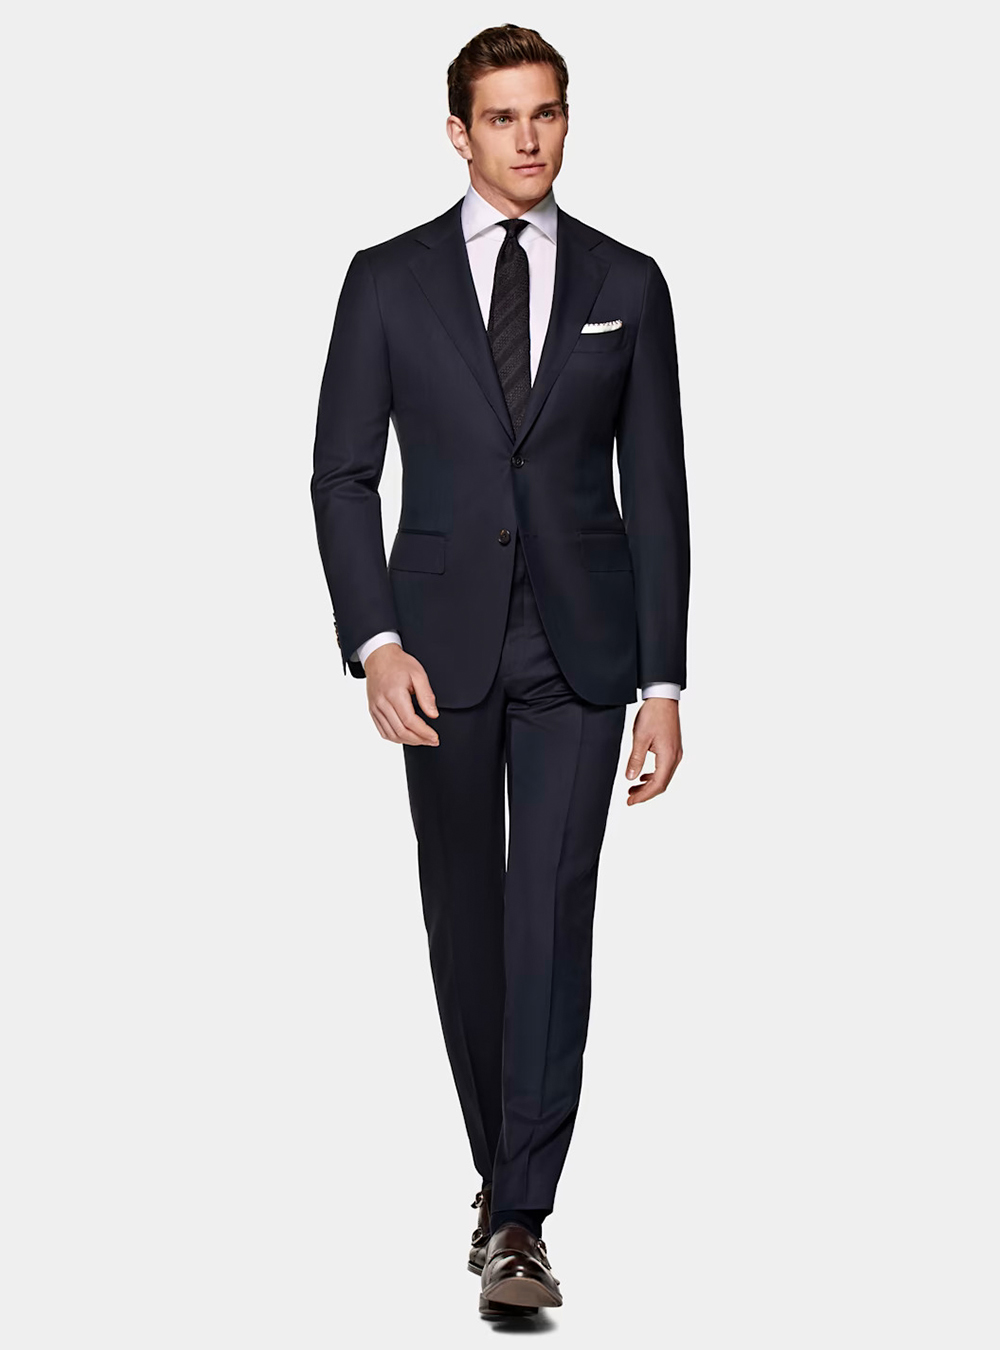 navy suit, white dress shirt, and brown plain toe monk straps